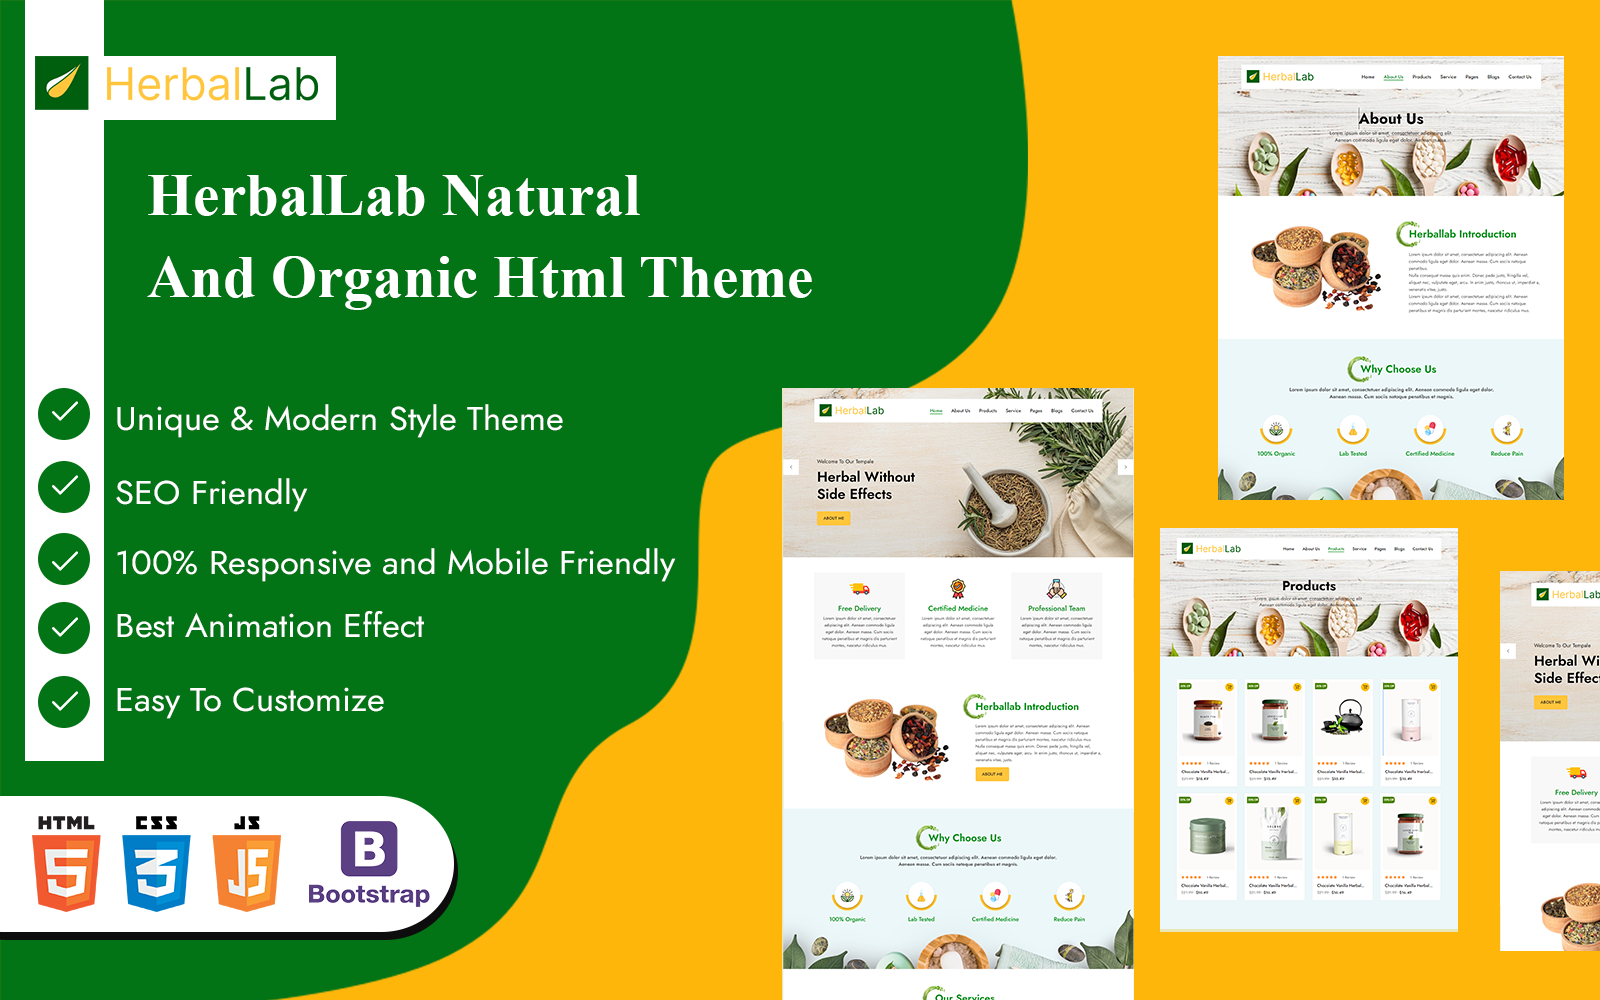 HerbalLab Natural And Organic Website template